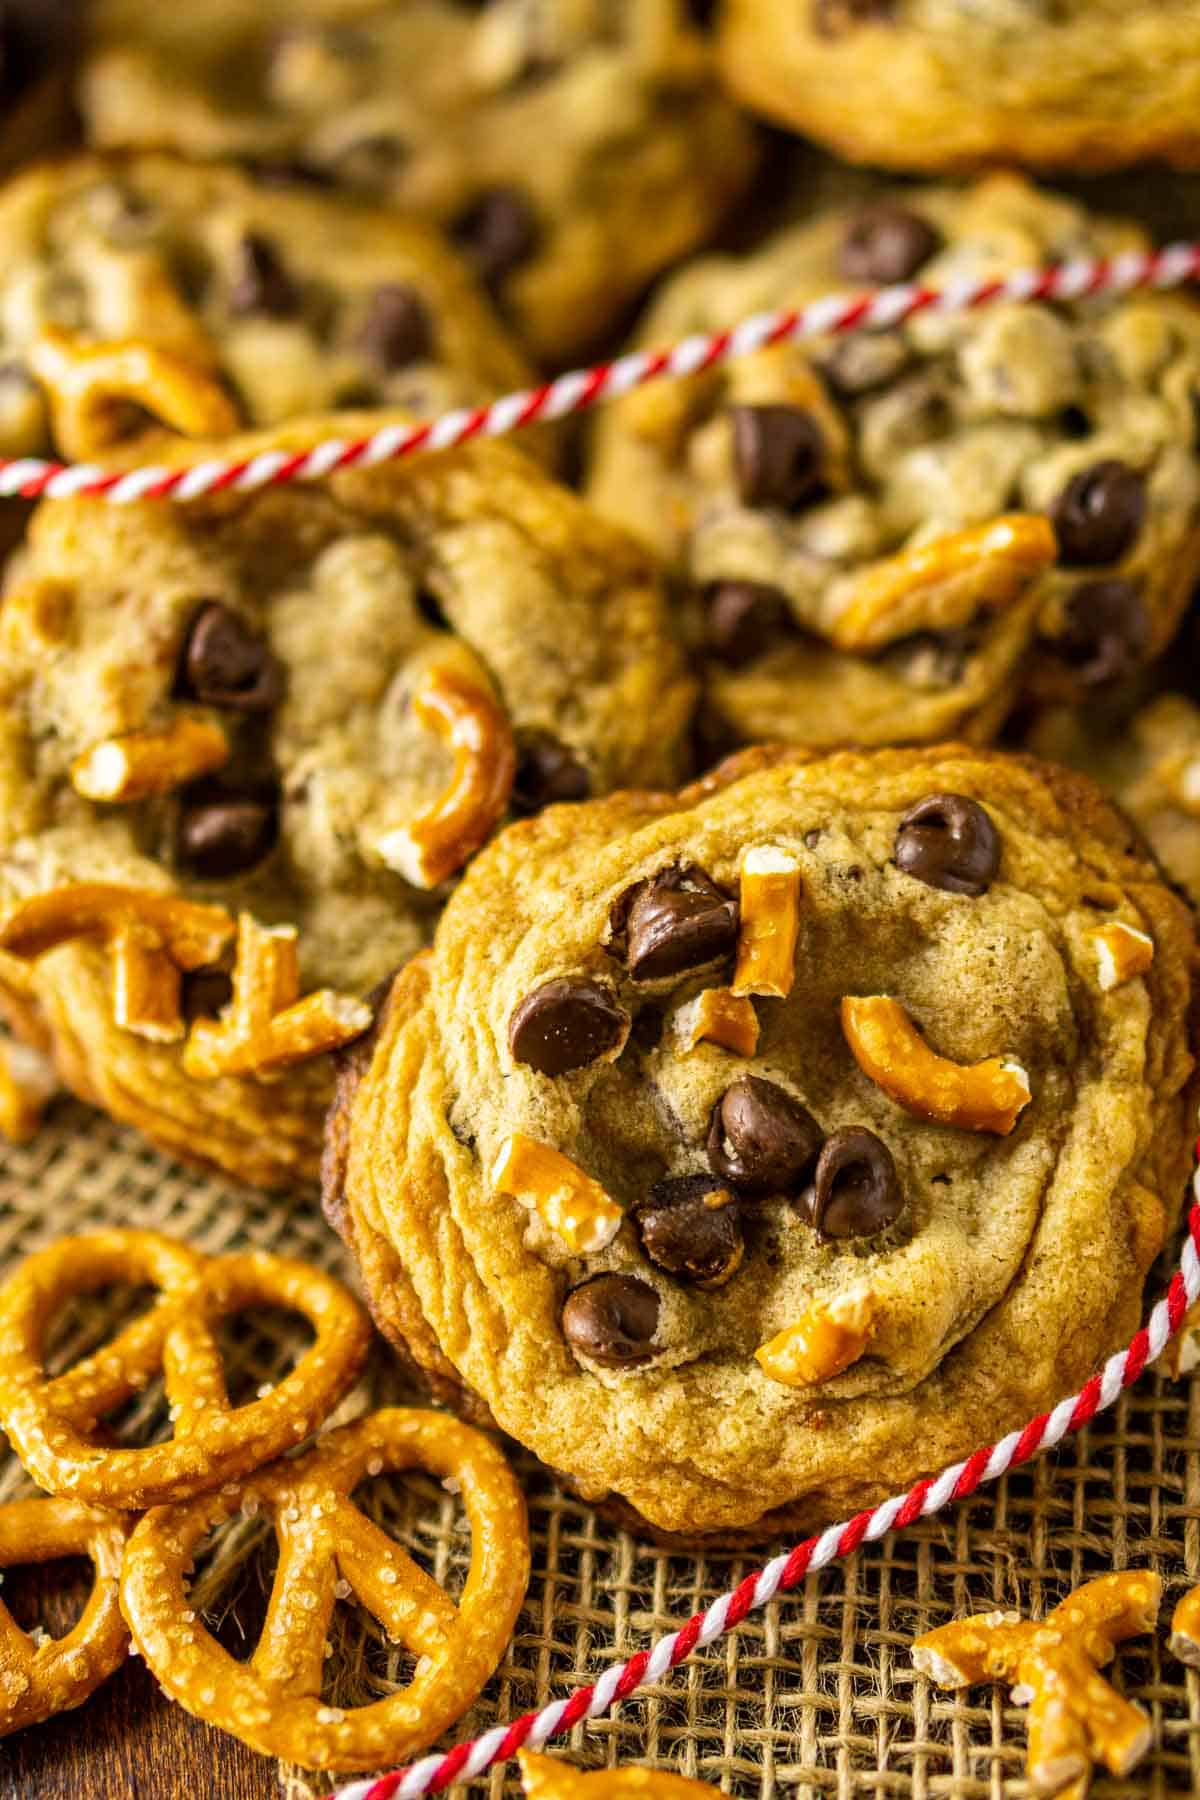 Looking down on some pretzel chocolate chip cookies on a burlap with crushed pretzels.